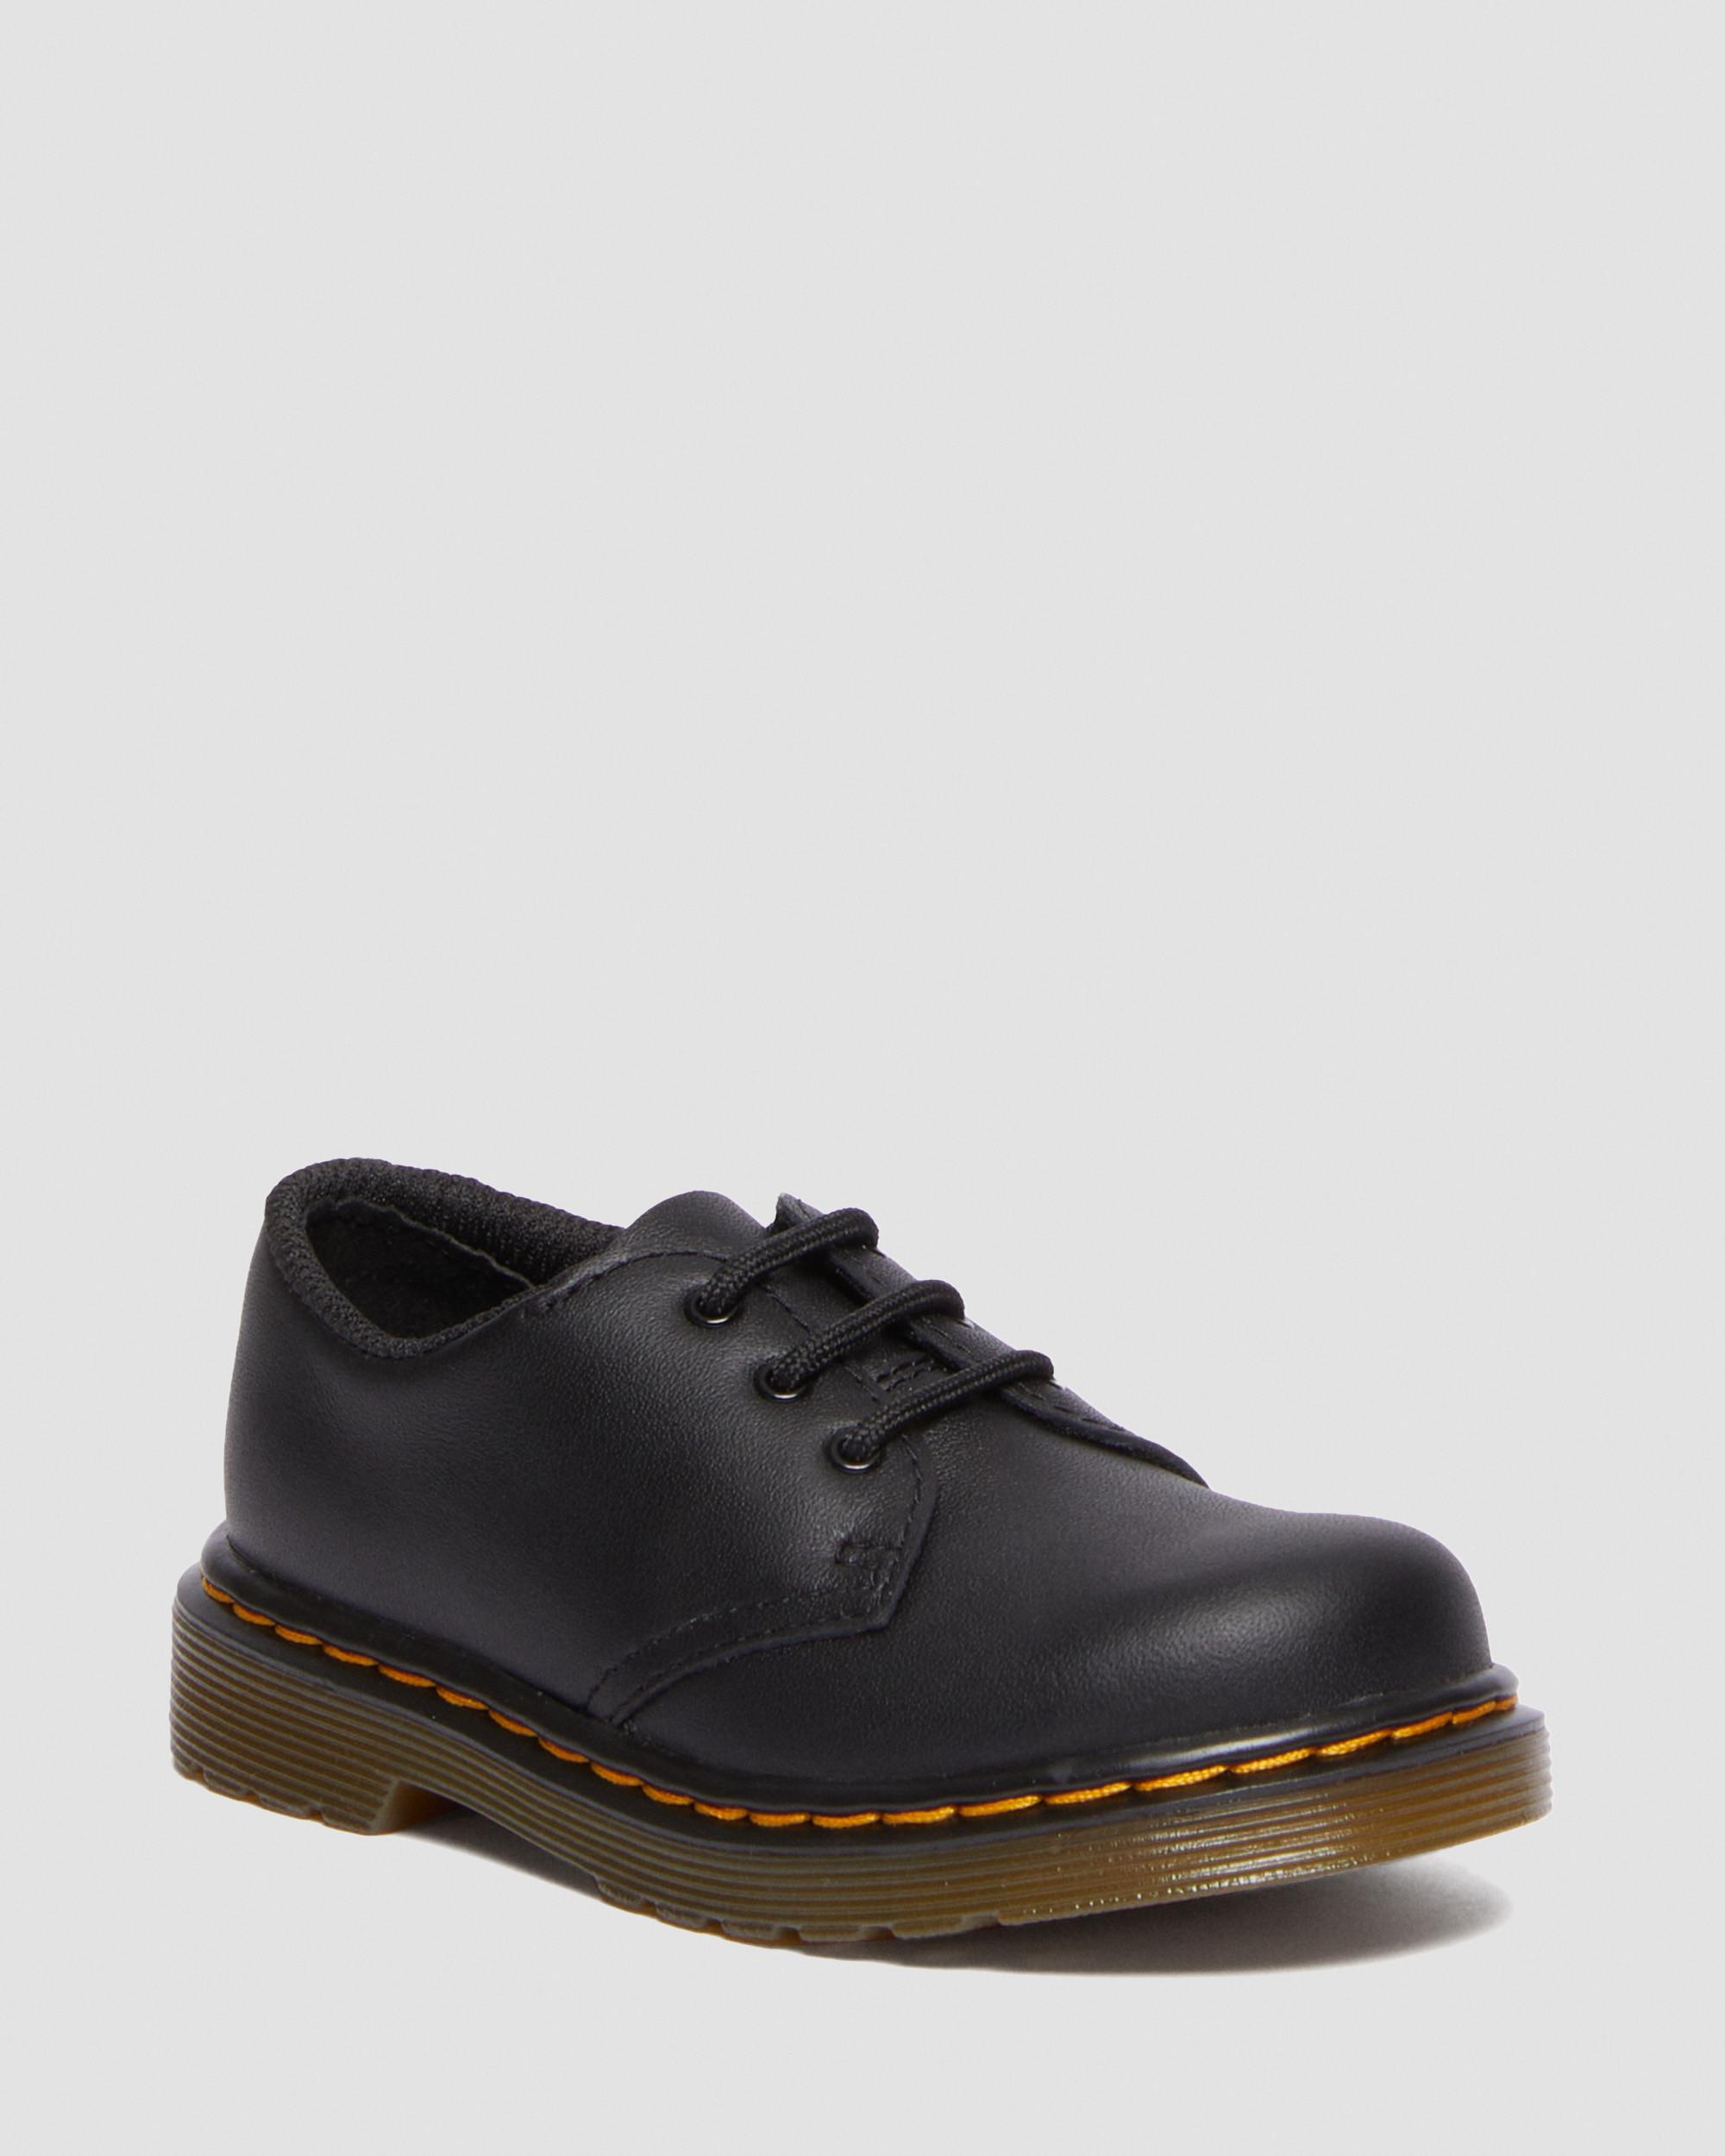 Toddler 1461 Softy T Leather Oxford Shoes | Dr. Martens